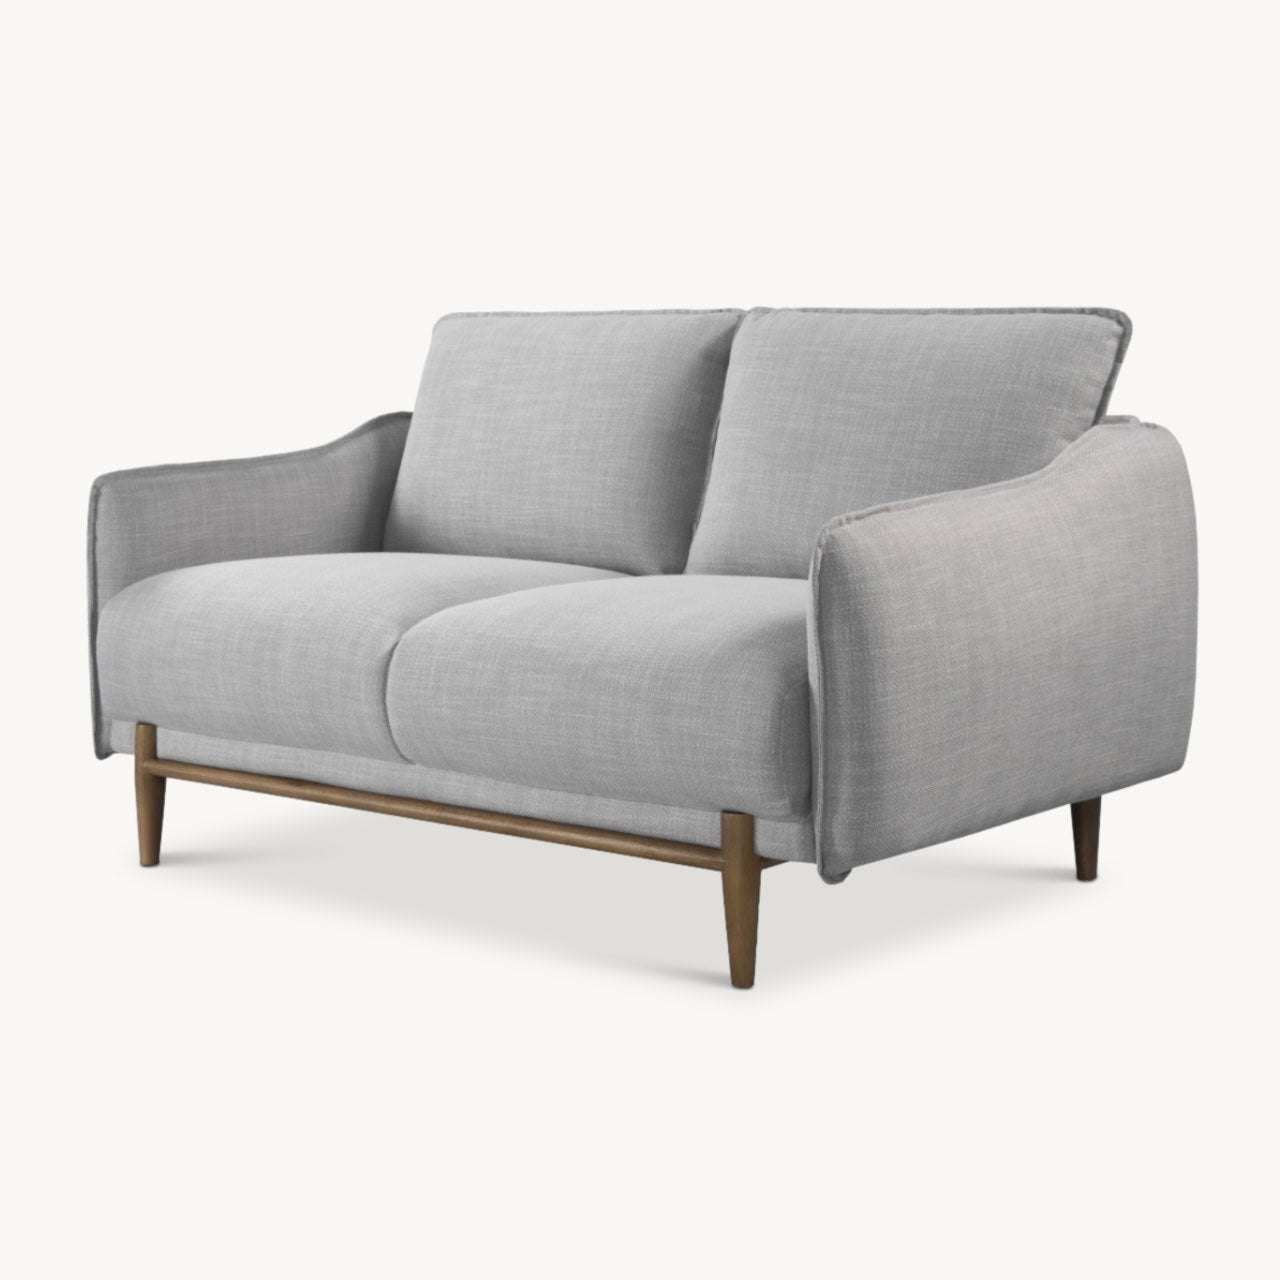 Simple, modern 2 seater sofa upholstered in grey linen fabric